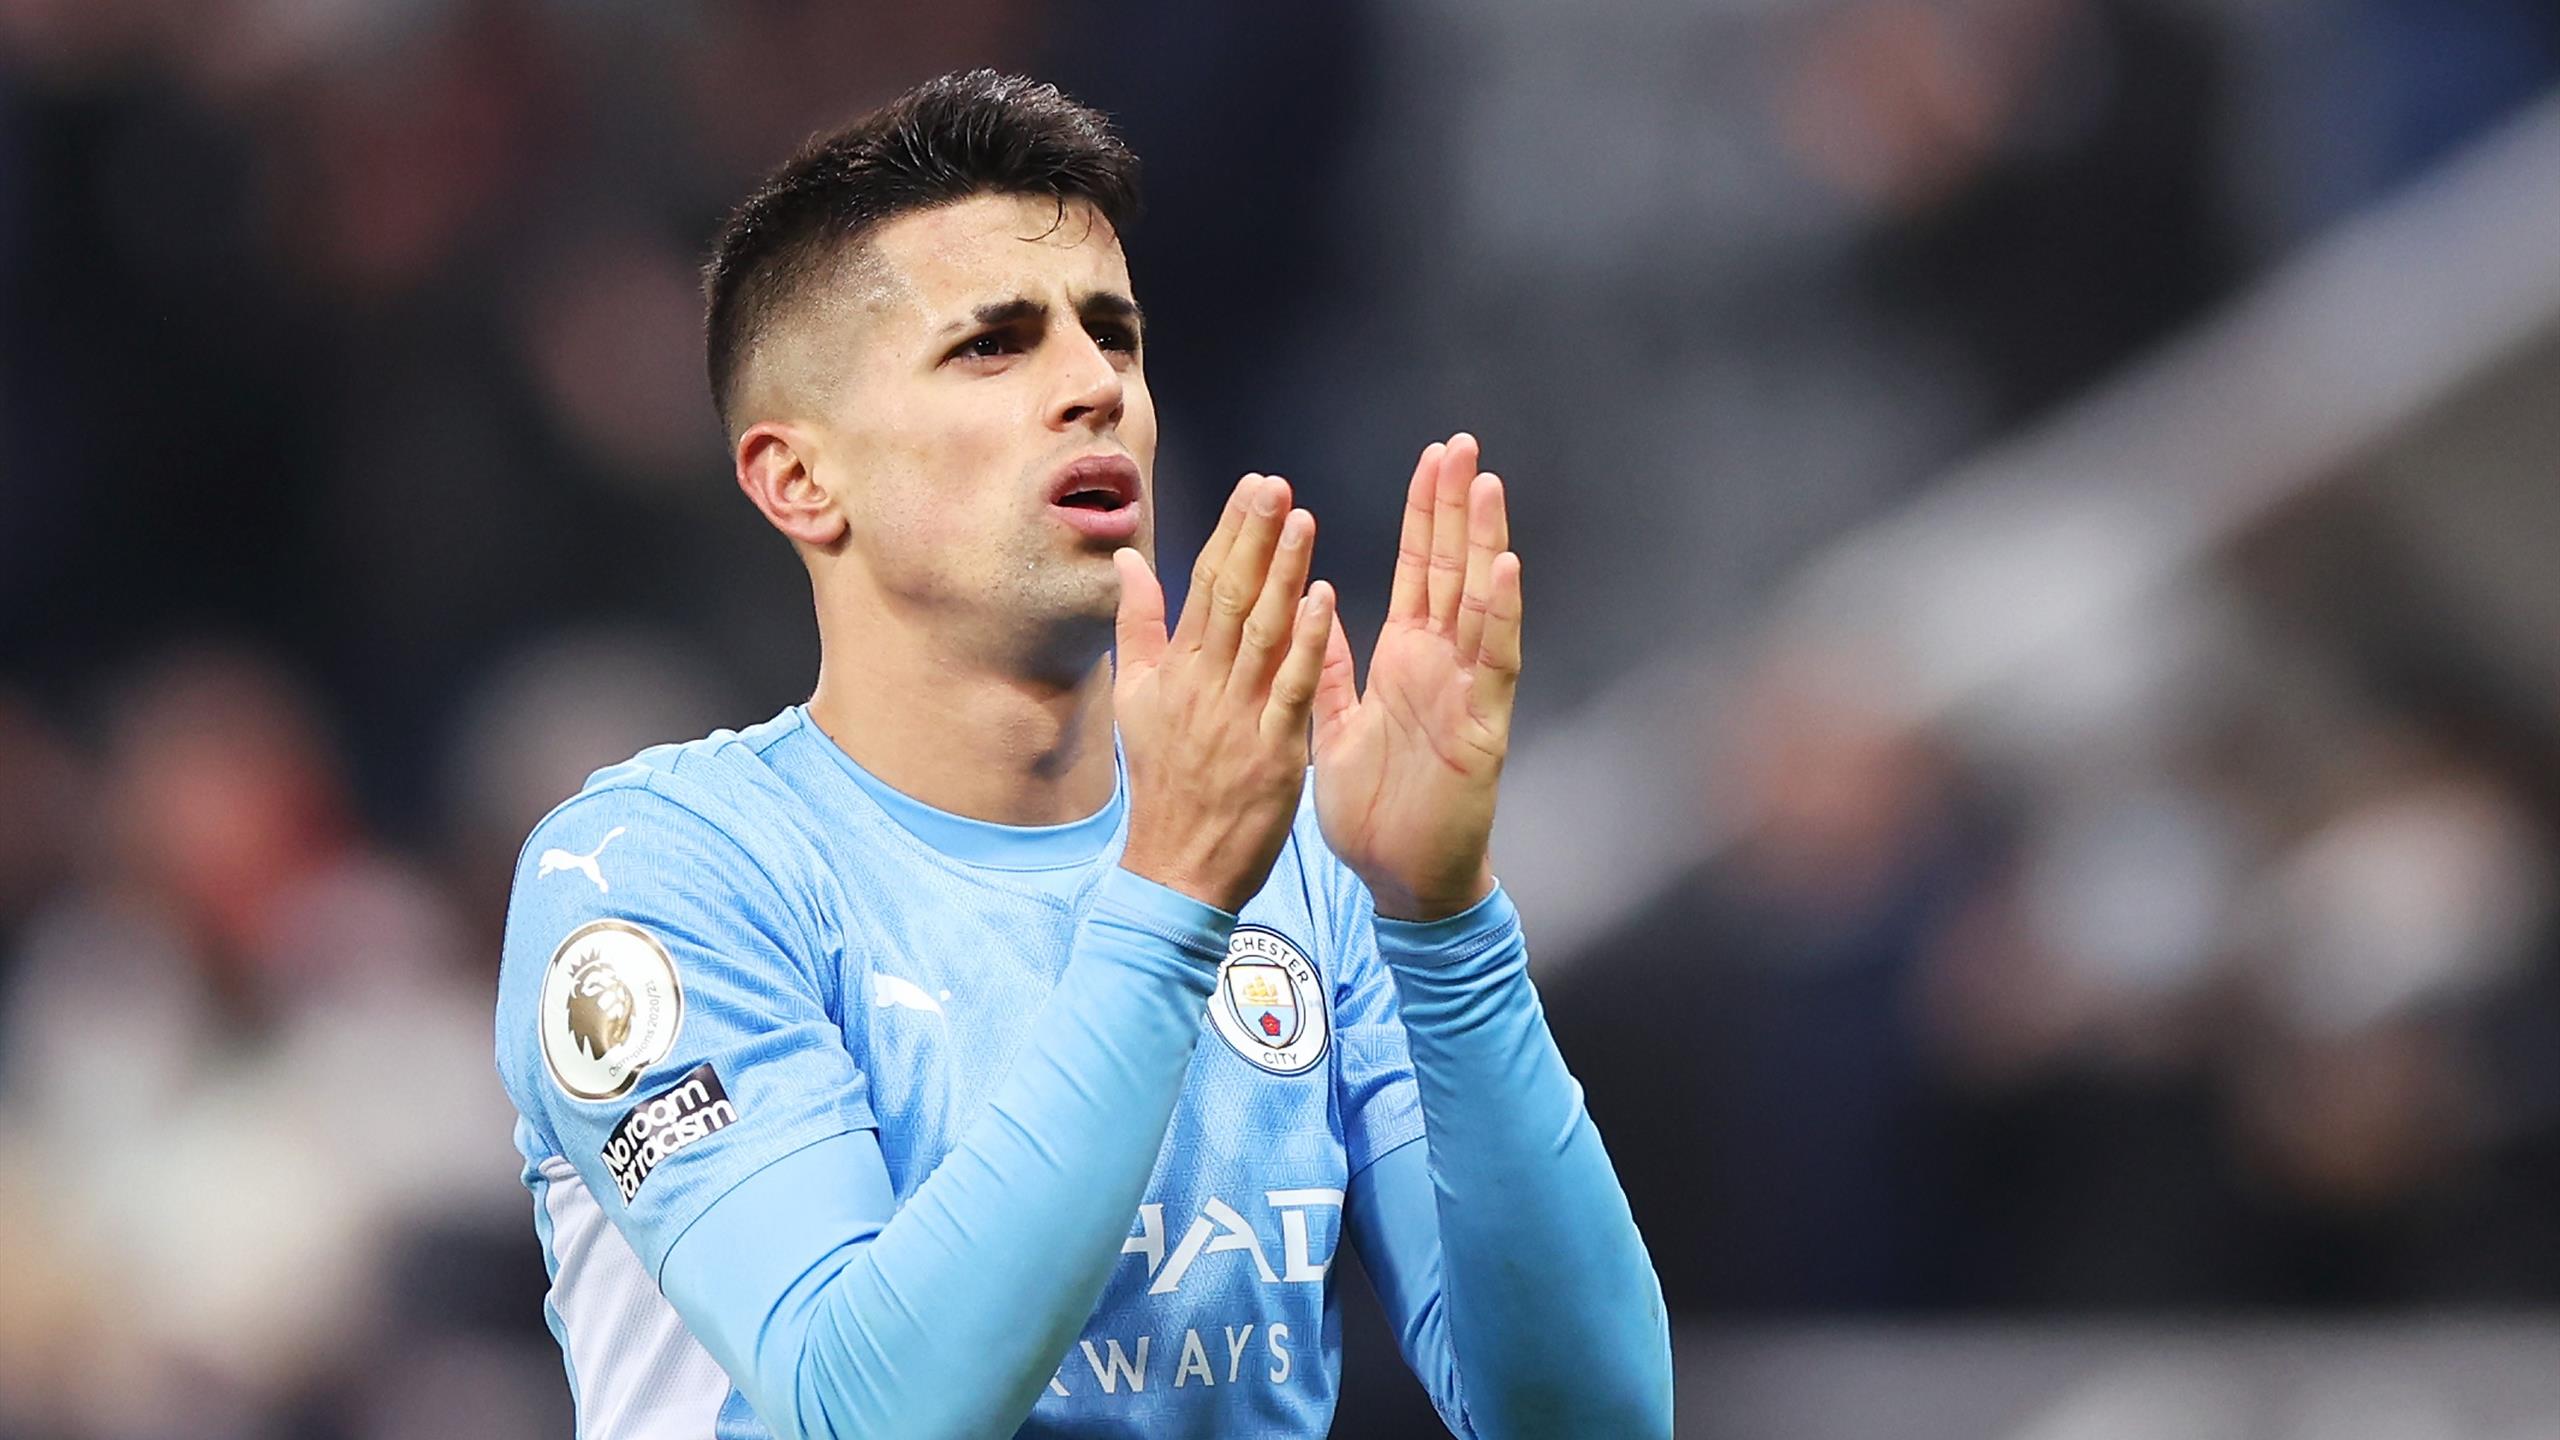 Joao Cancelo Signs Two Year Manchester City Extension Until 2027 After Impressing Under Pep Guardiola